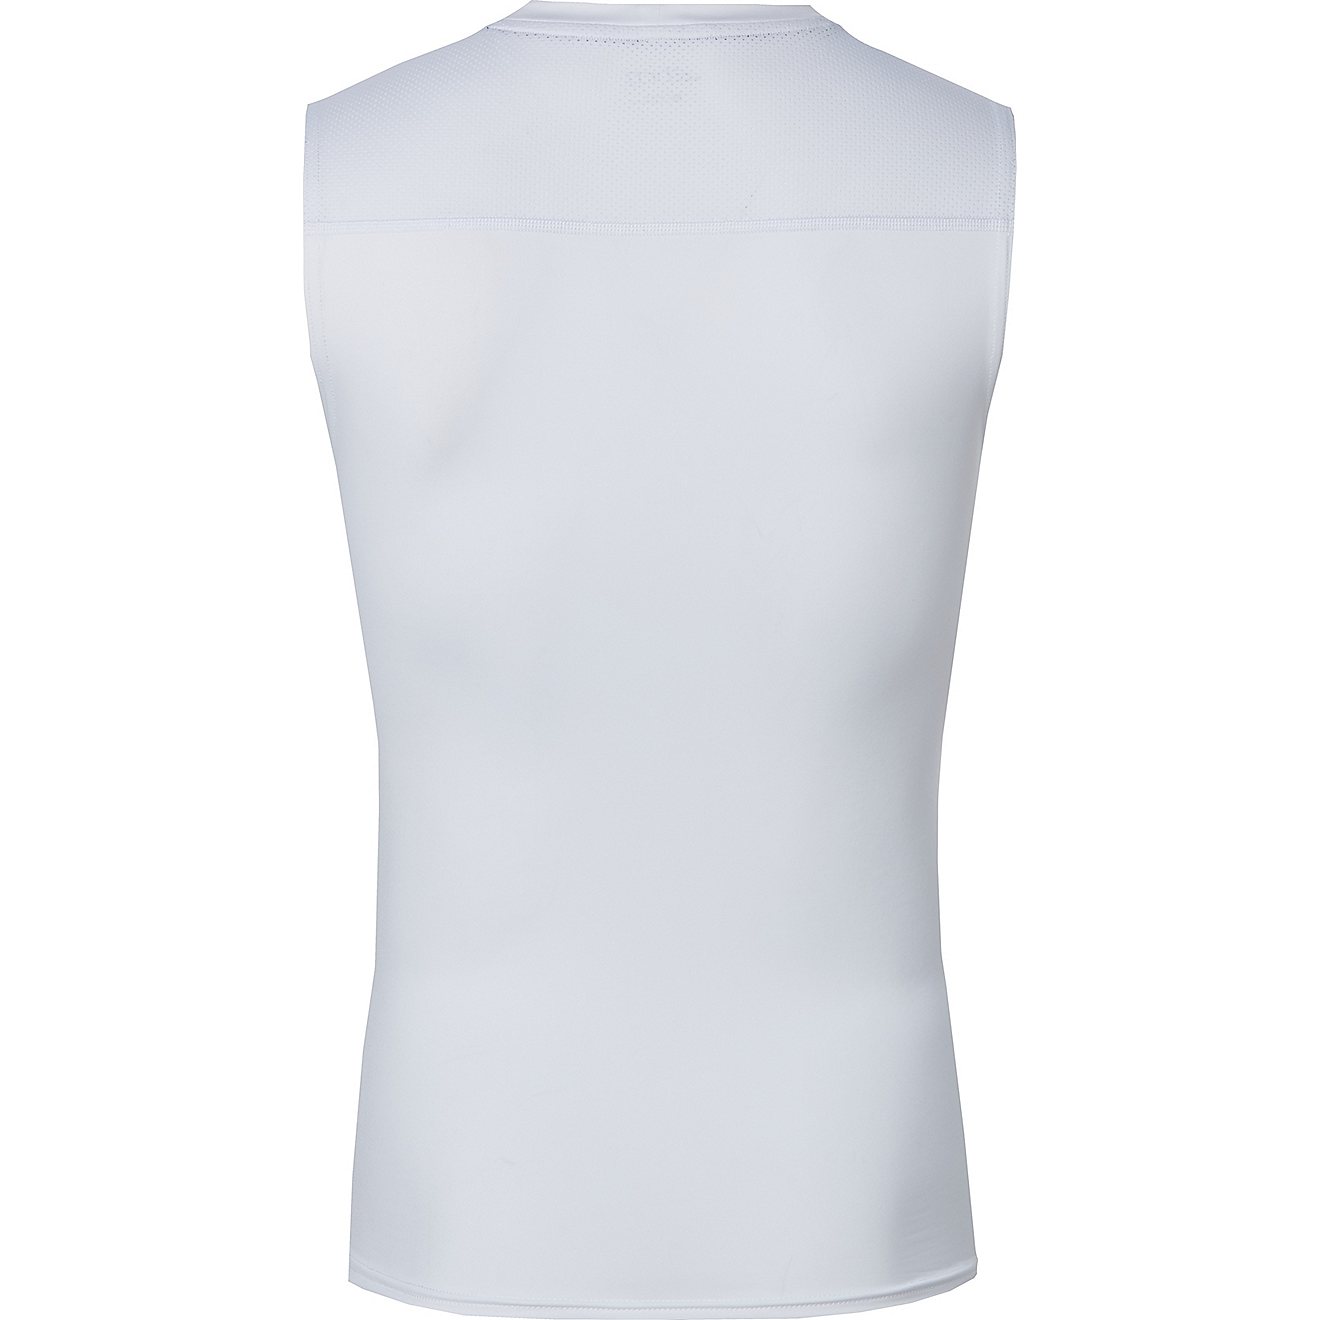 BCG Men's Sport Compression Sleeveless Top                                                                                       - view number 2